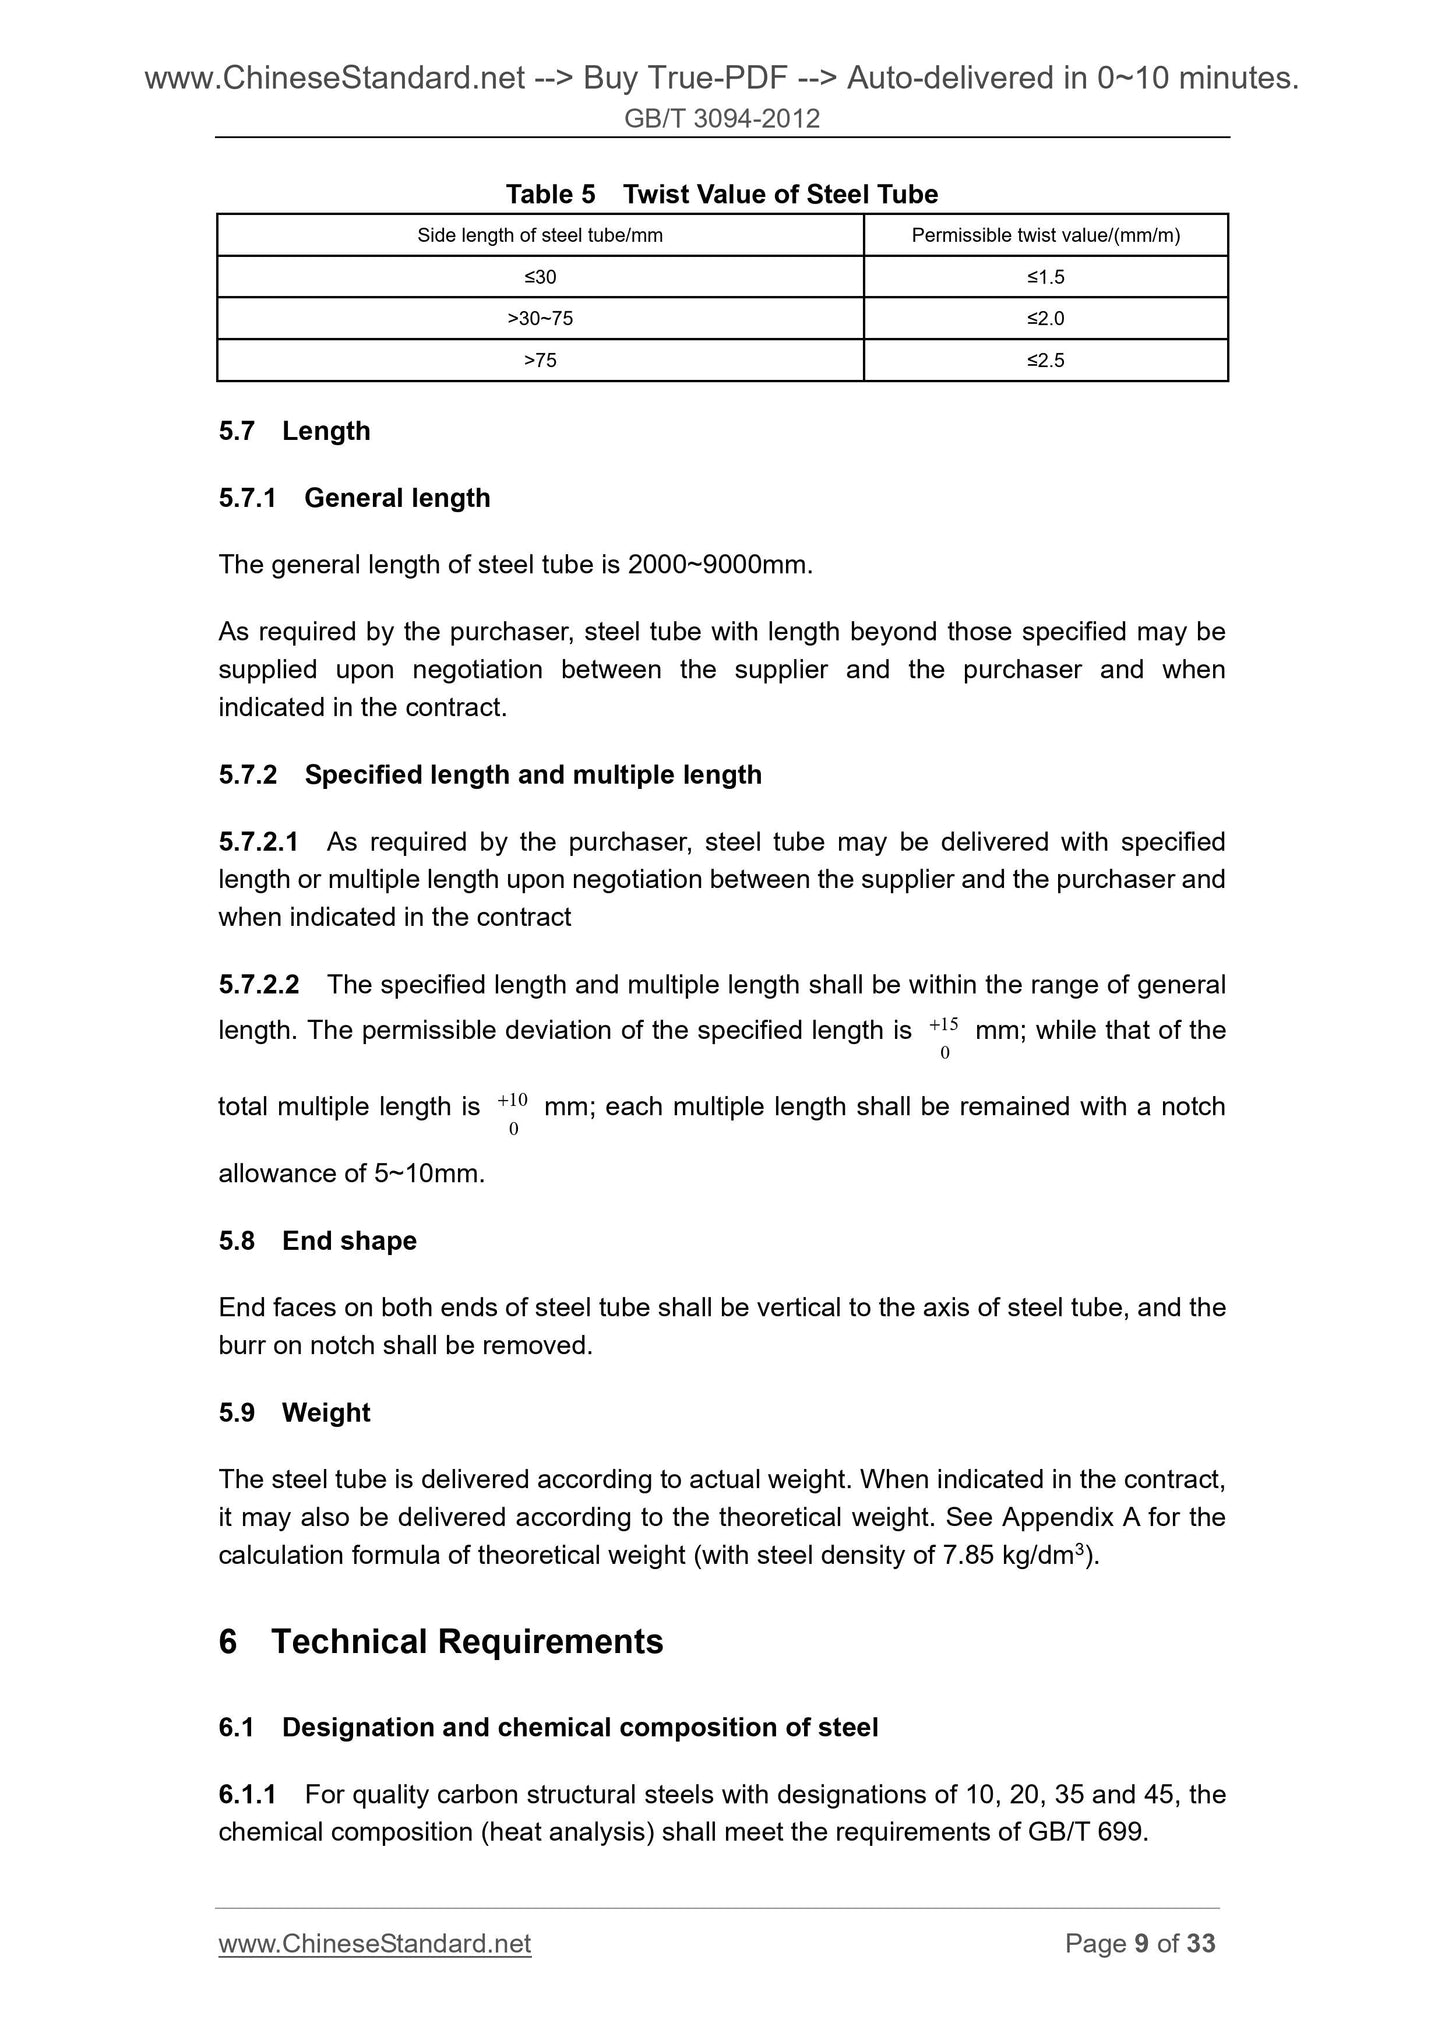 GB/T 3094-2012 Page 8